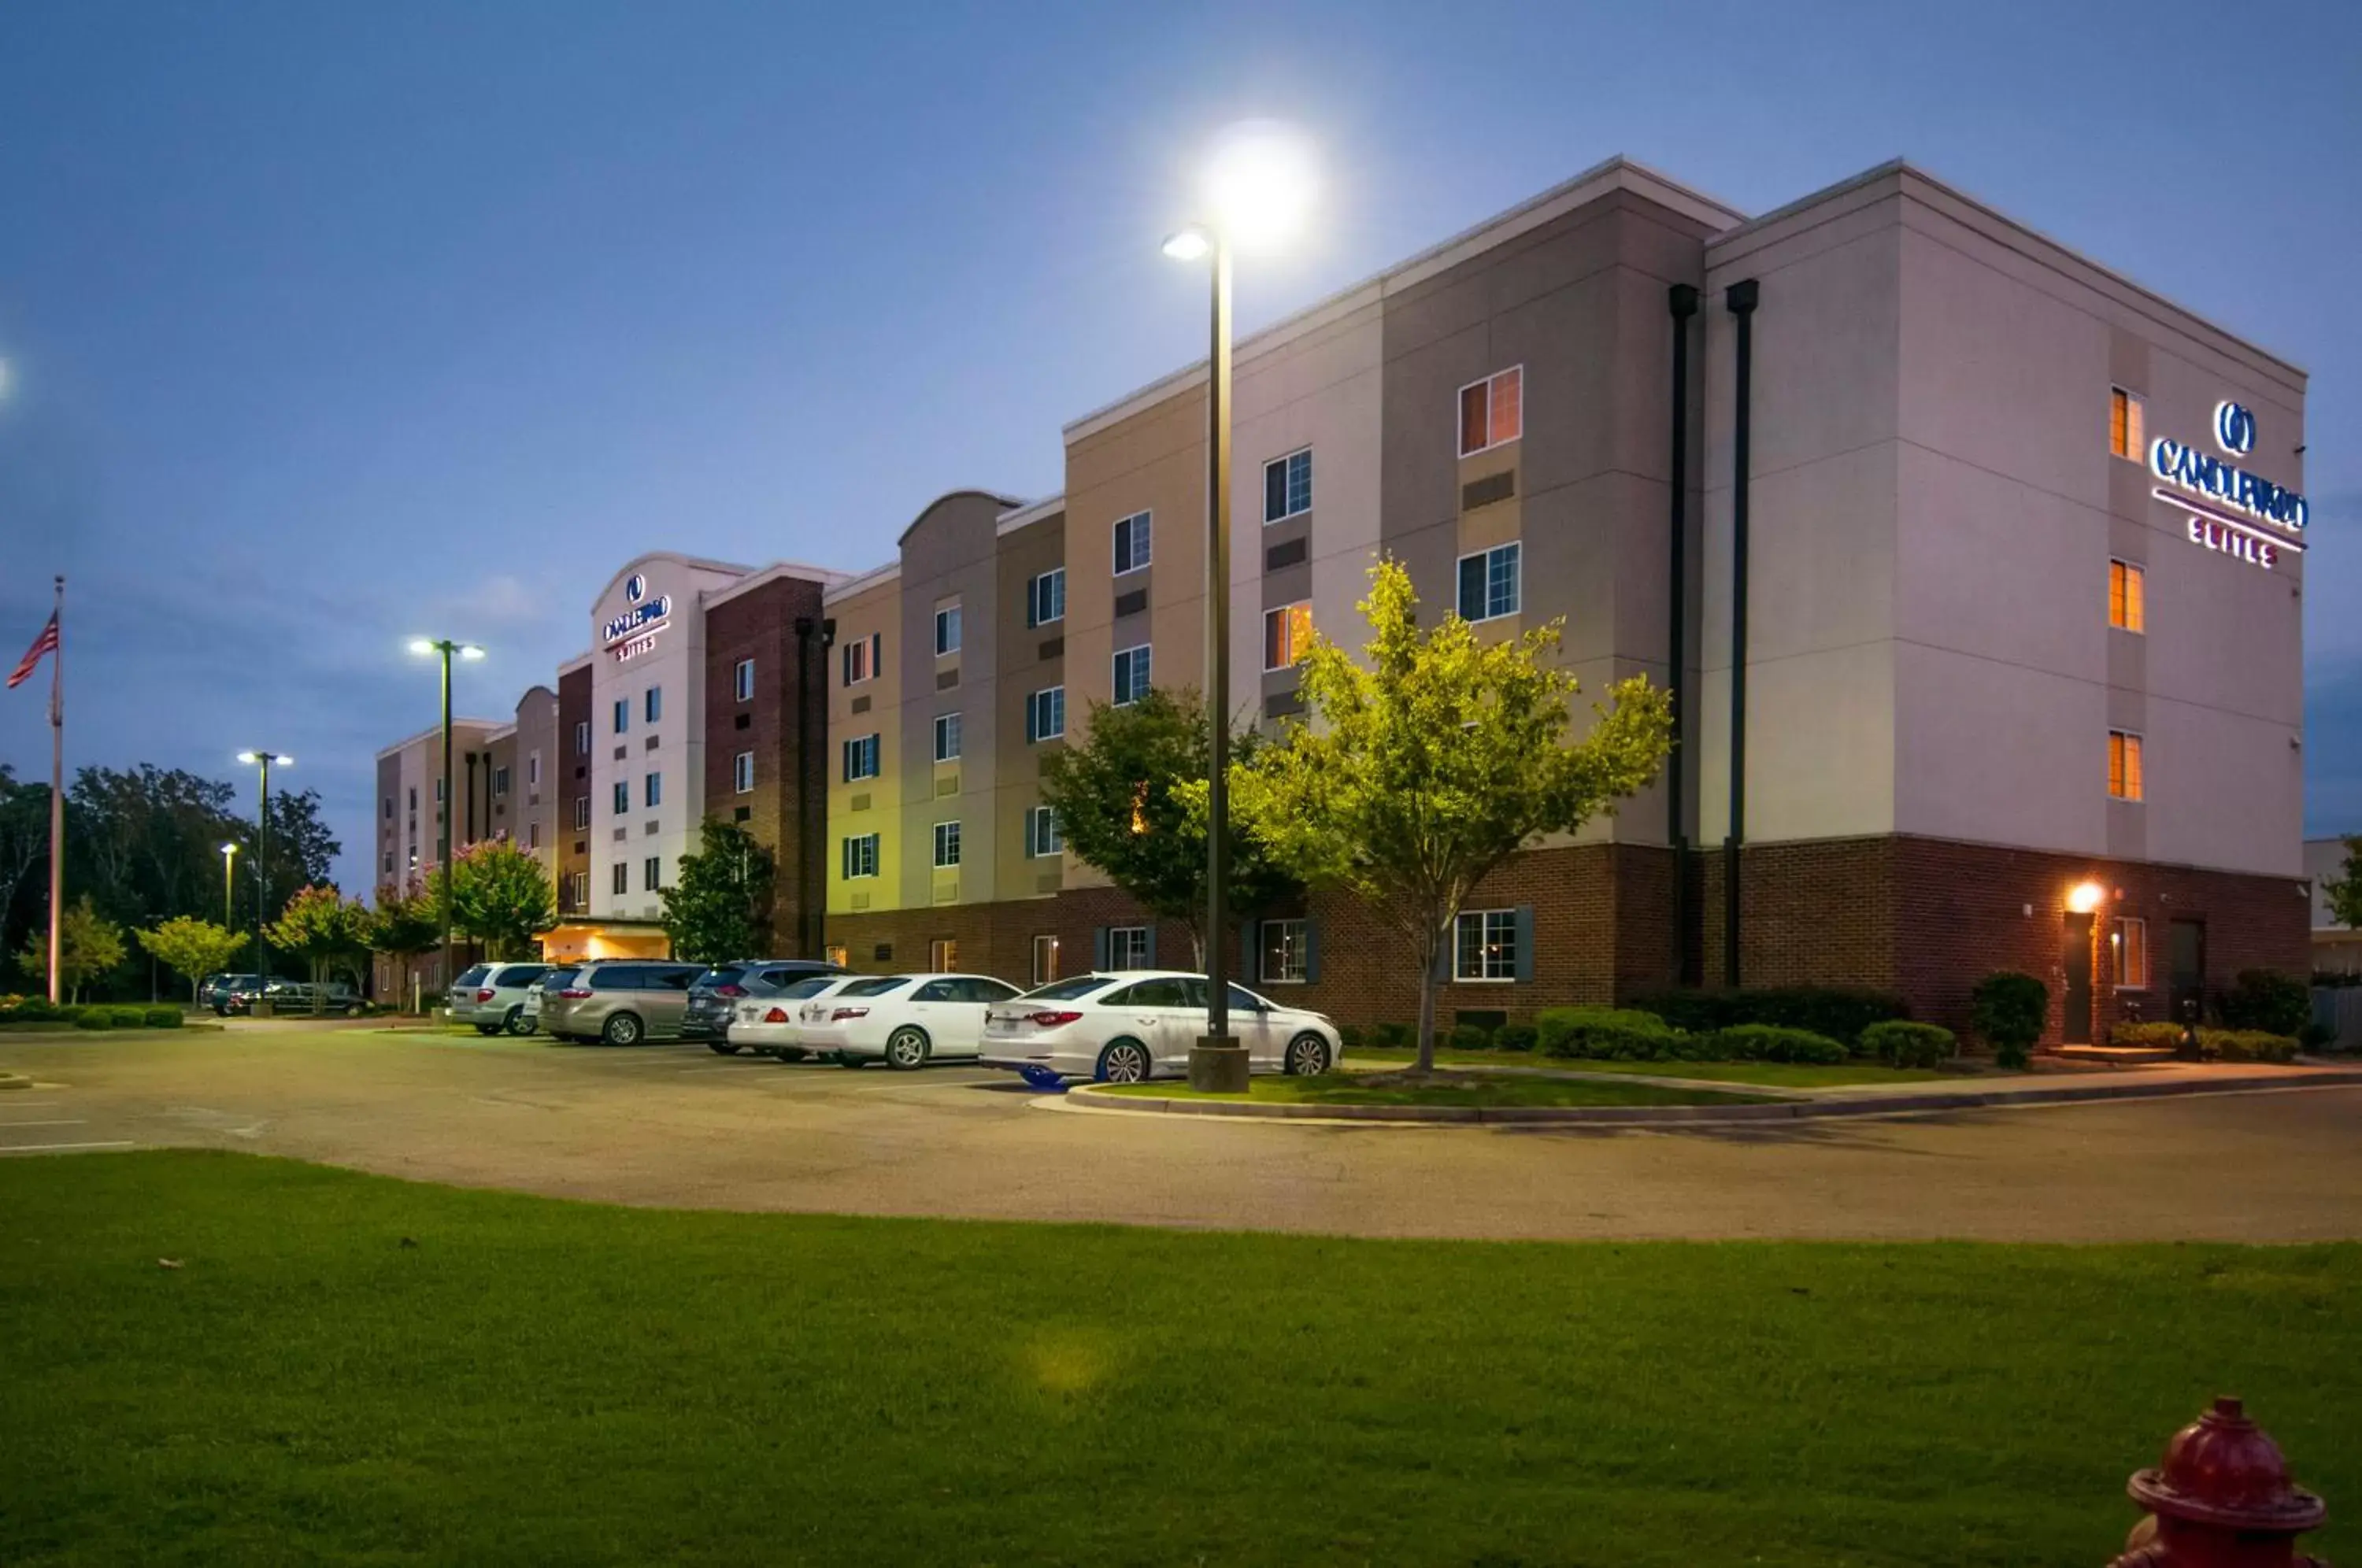 Property Building in Candlewood Suites Flowood, MS, an IHG Hotel